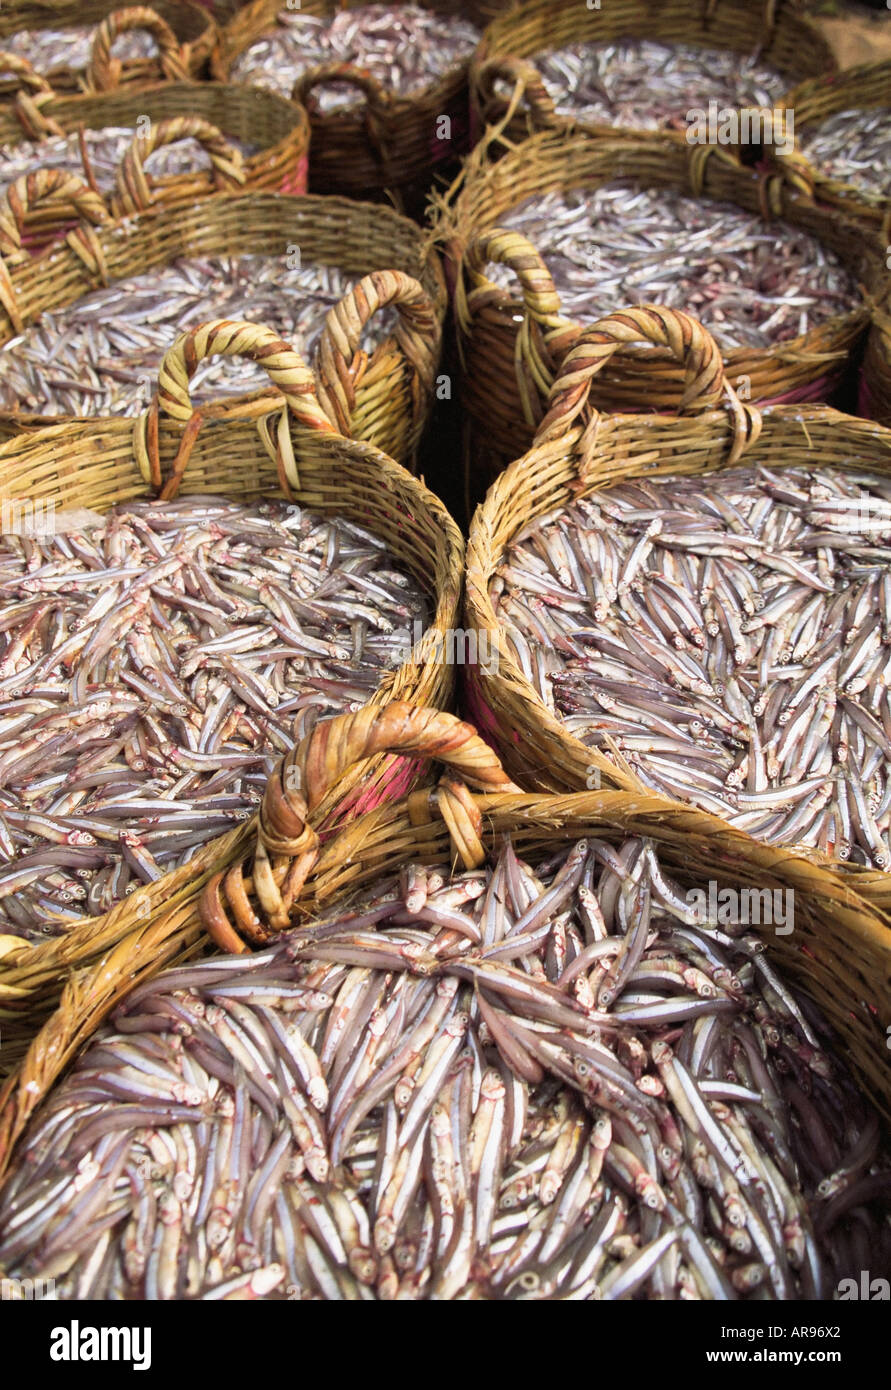 Freshly Caught Fish In Baskets Stock Photo